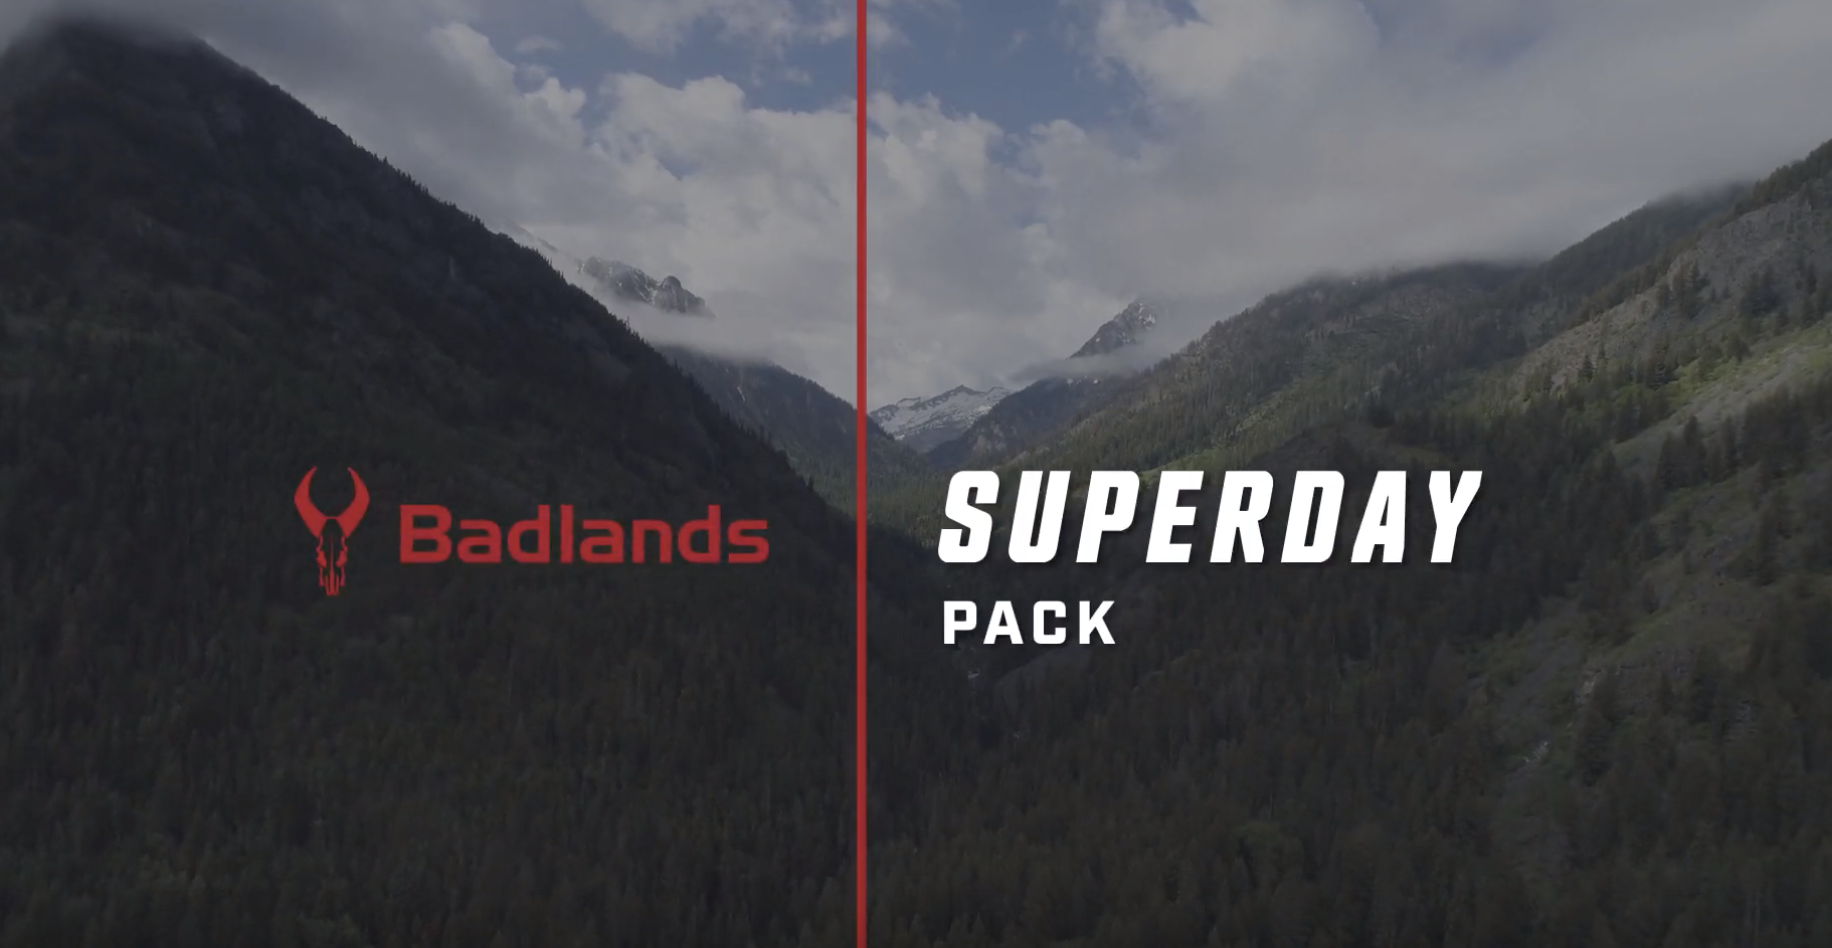 Learn more about the Superday Pack